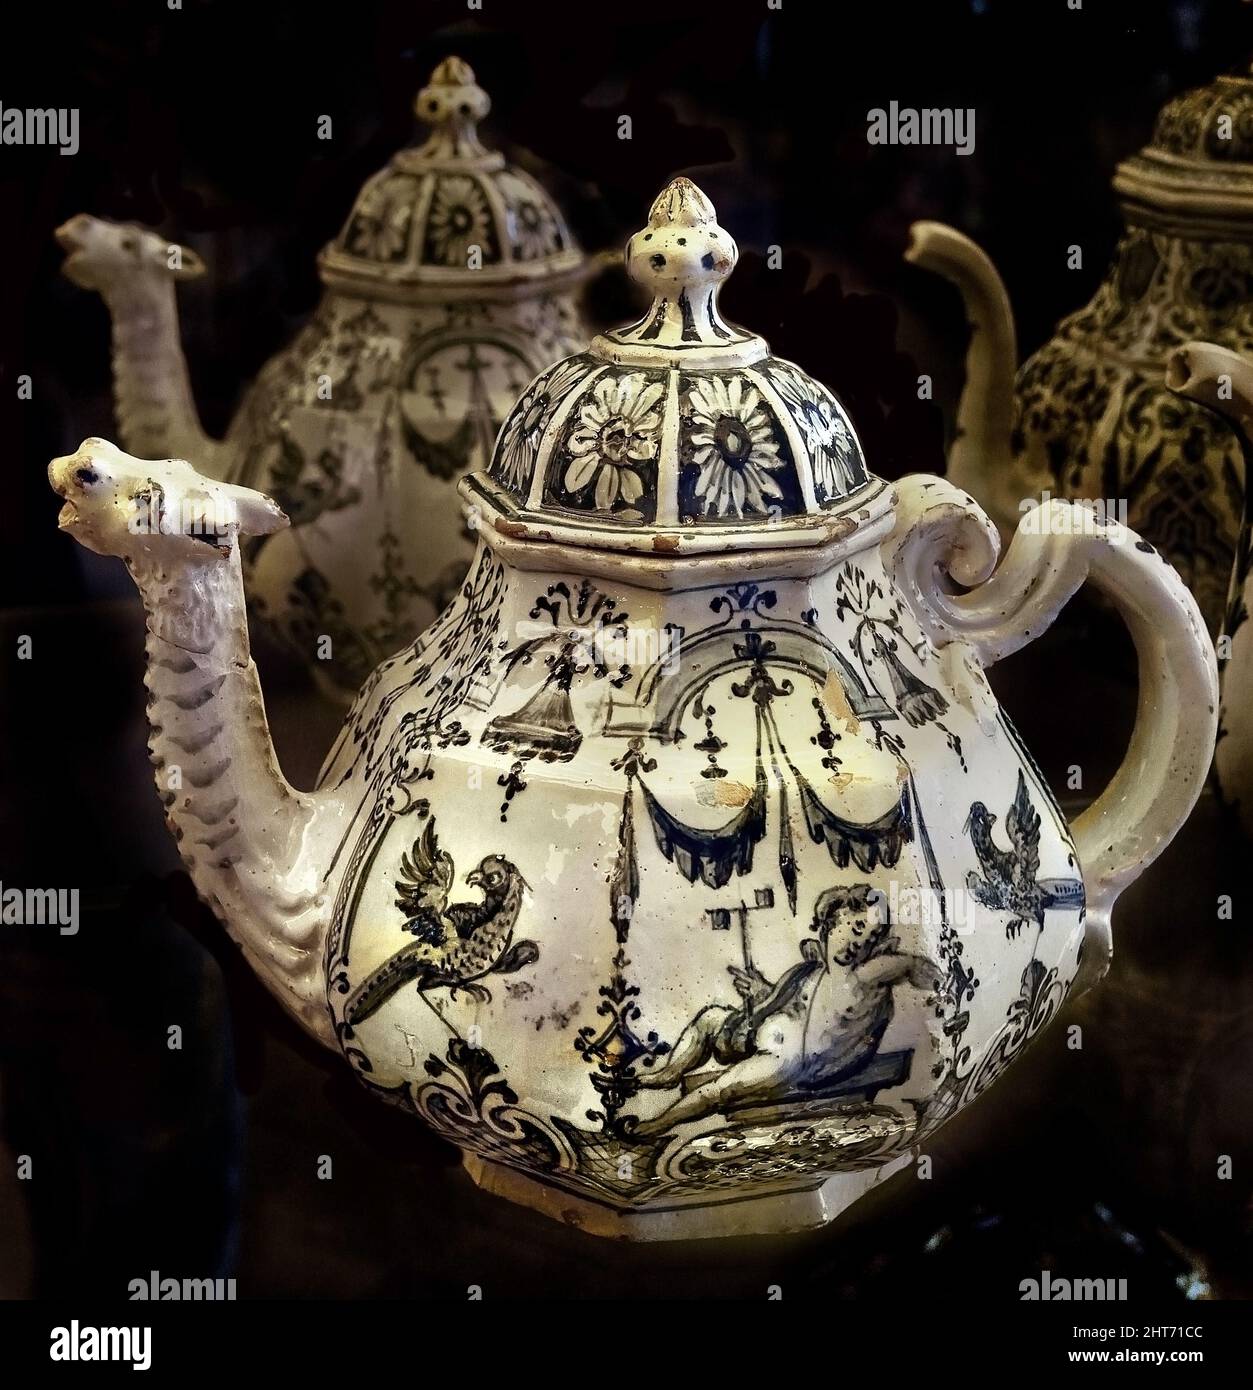 https://c8.alamy.com/comp/2HT71CC/caffettiera-coffee-maker-by-dono-dazeglio-1874-palazzo-madama-casaforte-degli-acaja-palace-in-turin-italy-italian-teiere-teapots-%60alla-berain%60-1740-faenza-ferniani-regoli-palazzo-madama-the-most-ancient-building-in-turin-is-right-in-the-city-centre-having-played-a-leading-role-in-its-history-from-roman-times-through-to-the-present-day-it-was-declared-a-world-heritage-site-with-the-other-residences-of-the-house-of-savoy-in-1997-2HT71CC.jpg